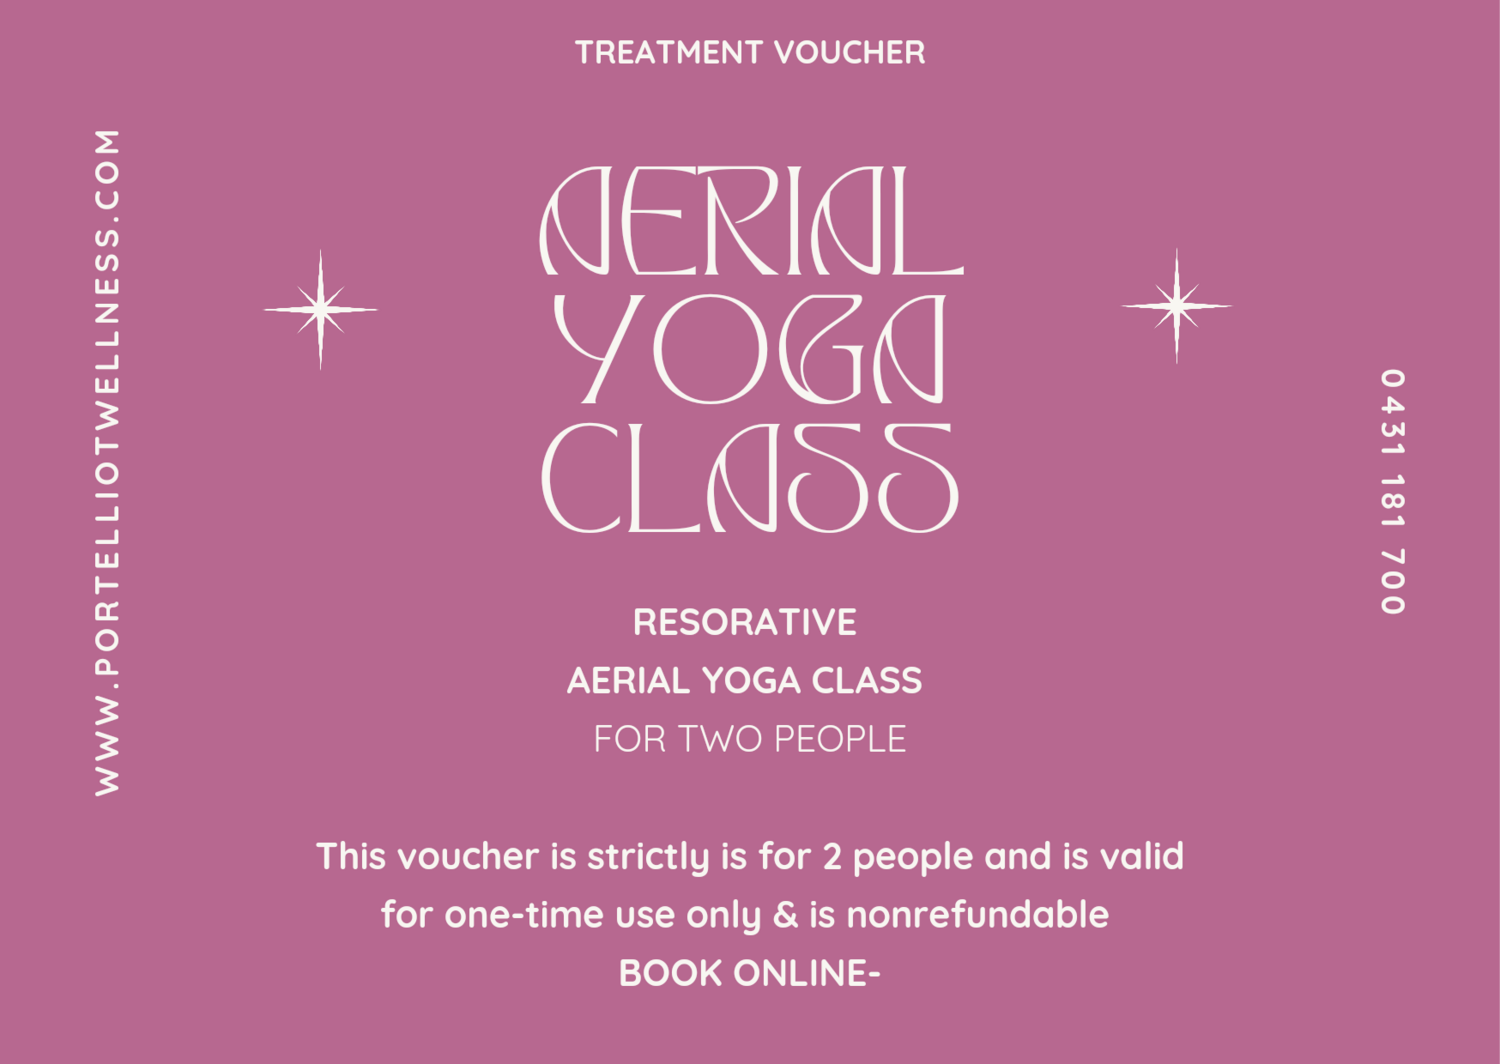 Resorative Aerial Yoga Class for 2 people